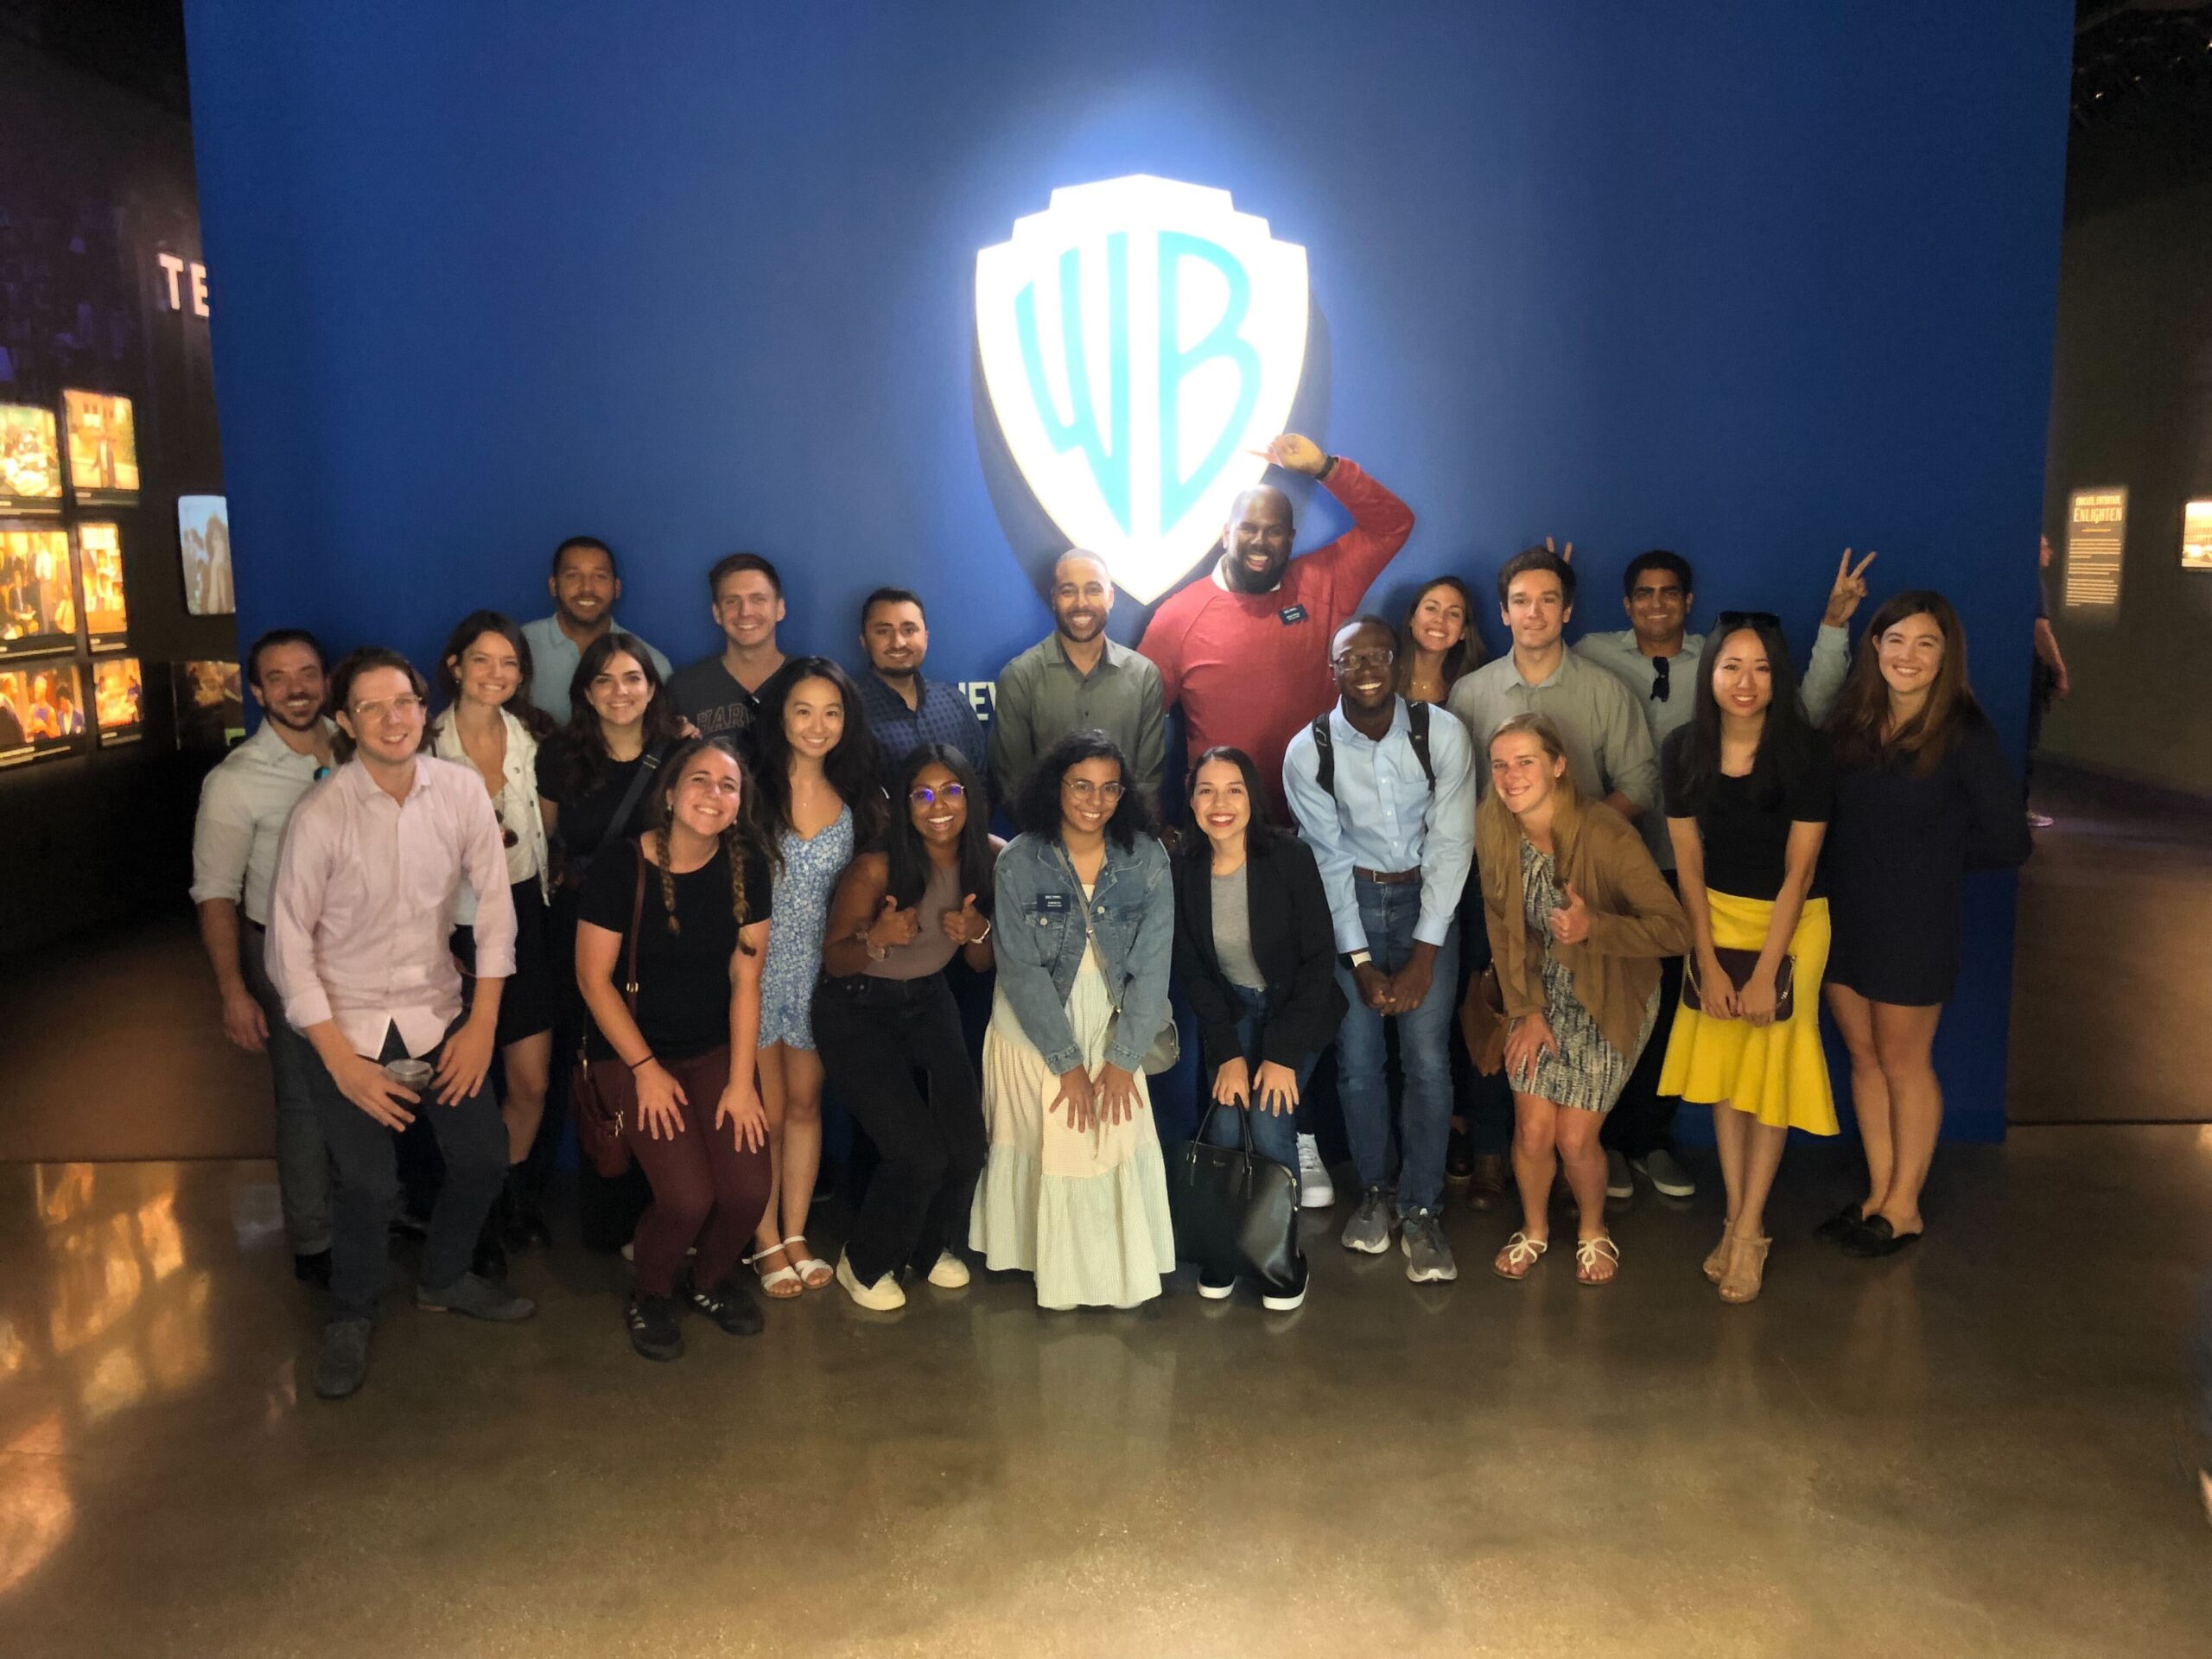 Consortium Fellow Ife Ibitayo in a group photo with other members of his large cohort during the Tour of Warner Brothers Studios.